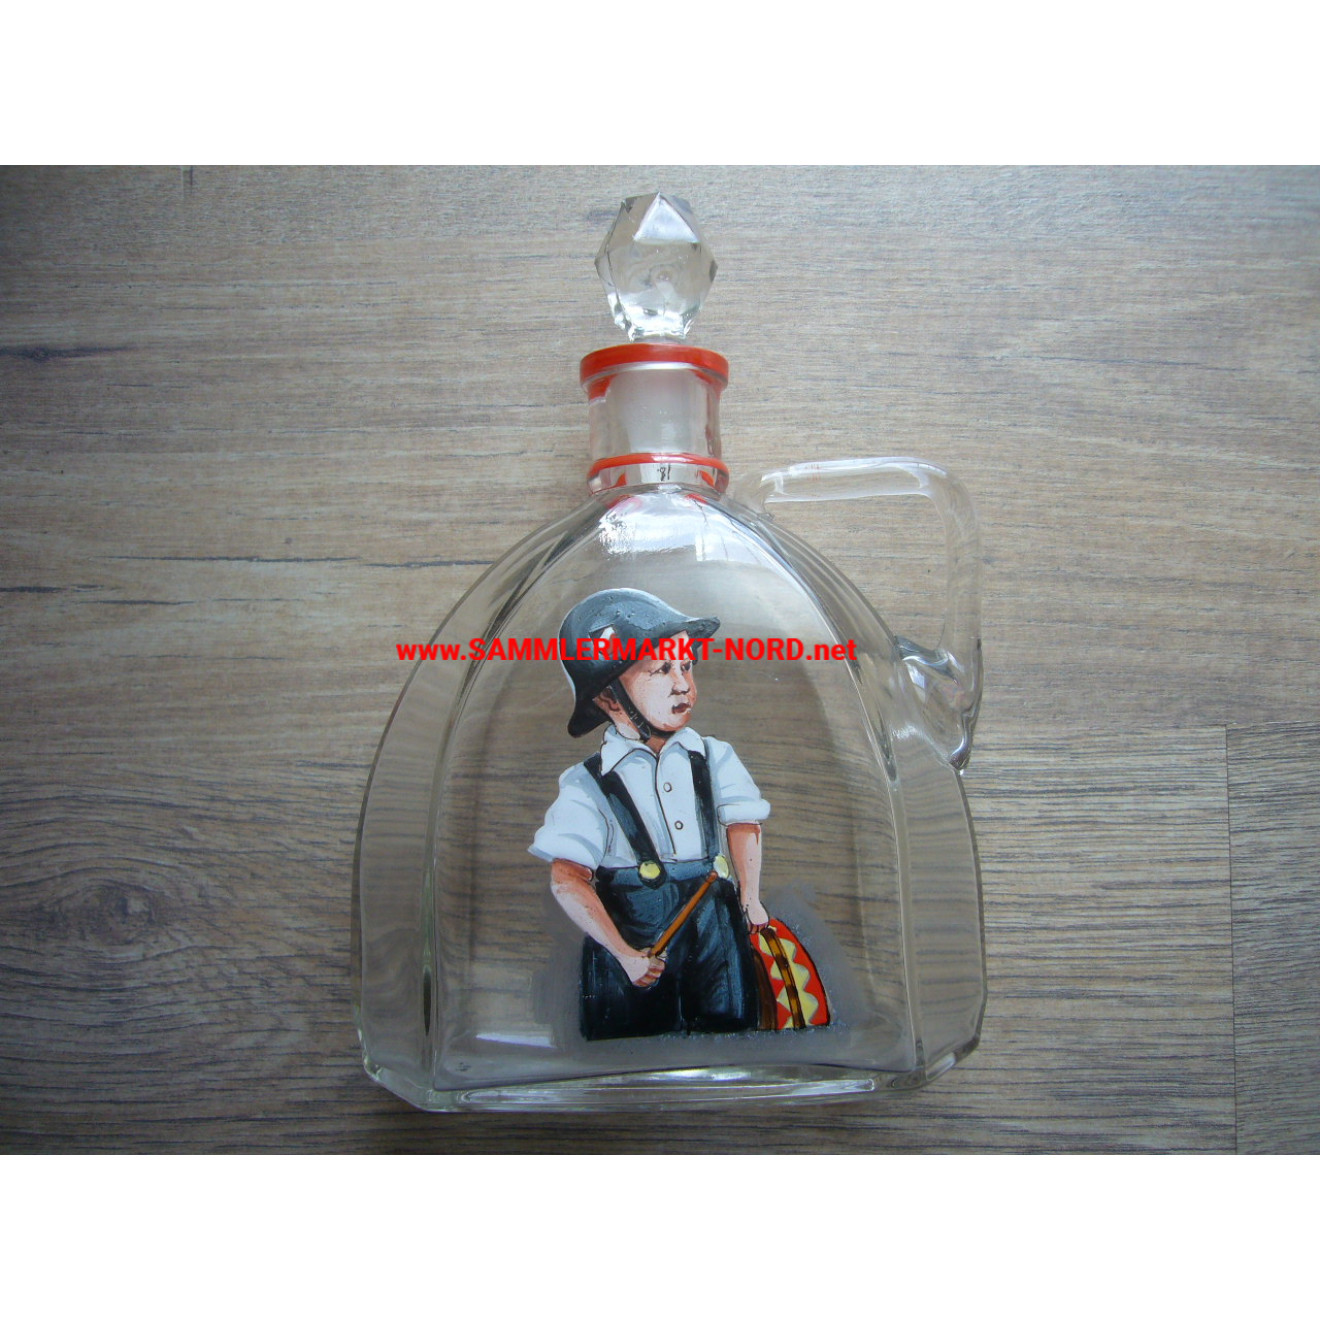 Glass carafe - child with steel helmet and drum